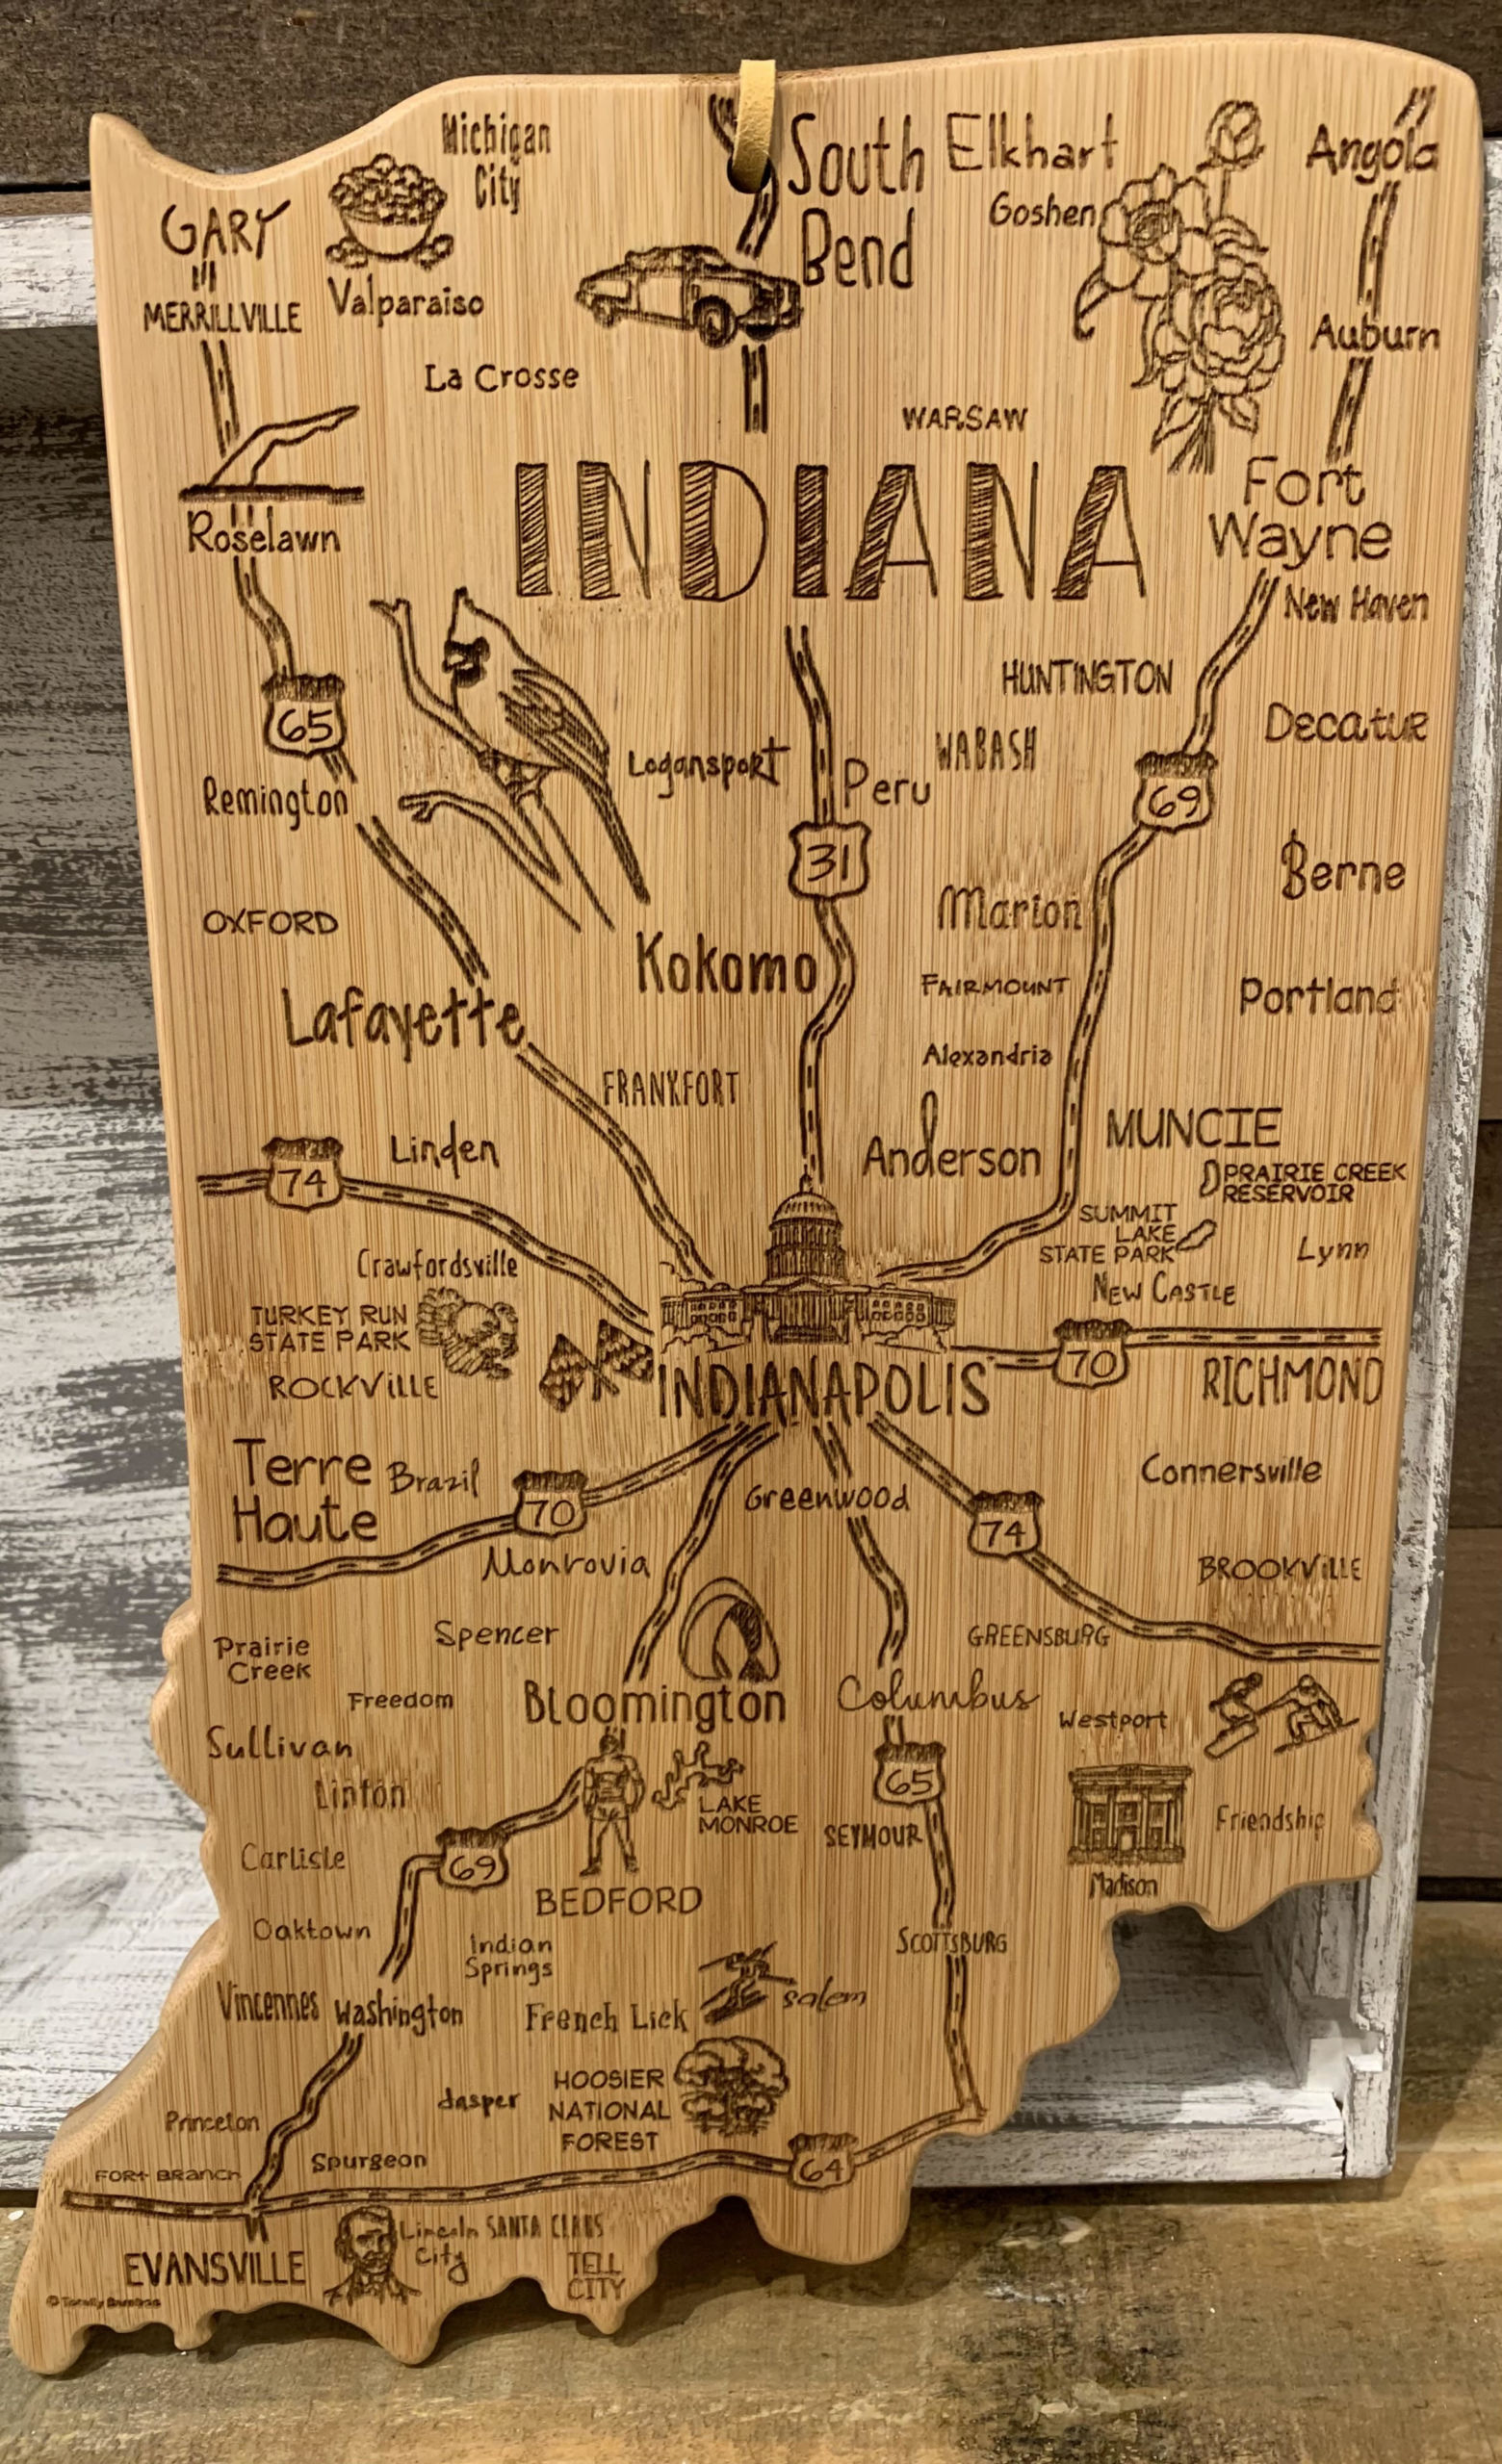 A cutting board in the shape of Indiana